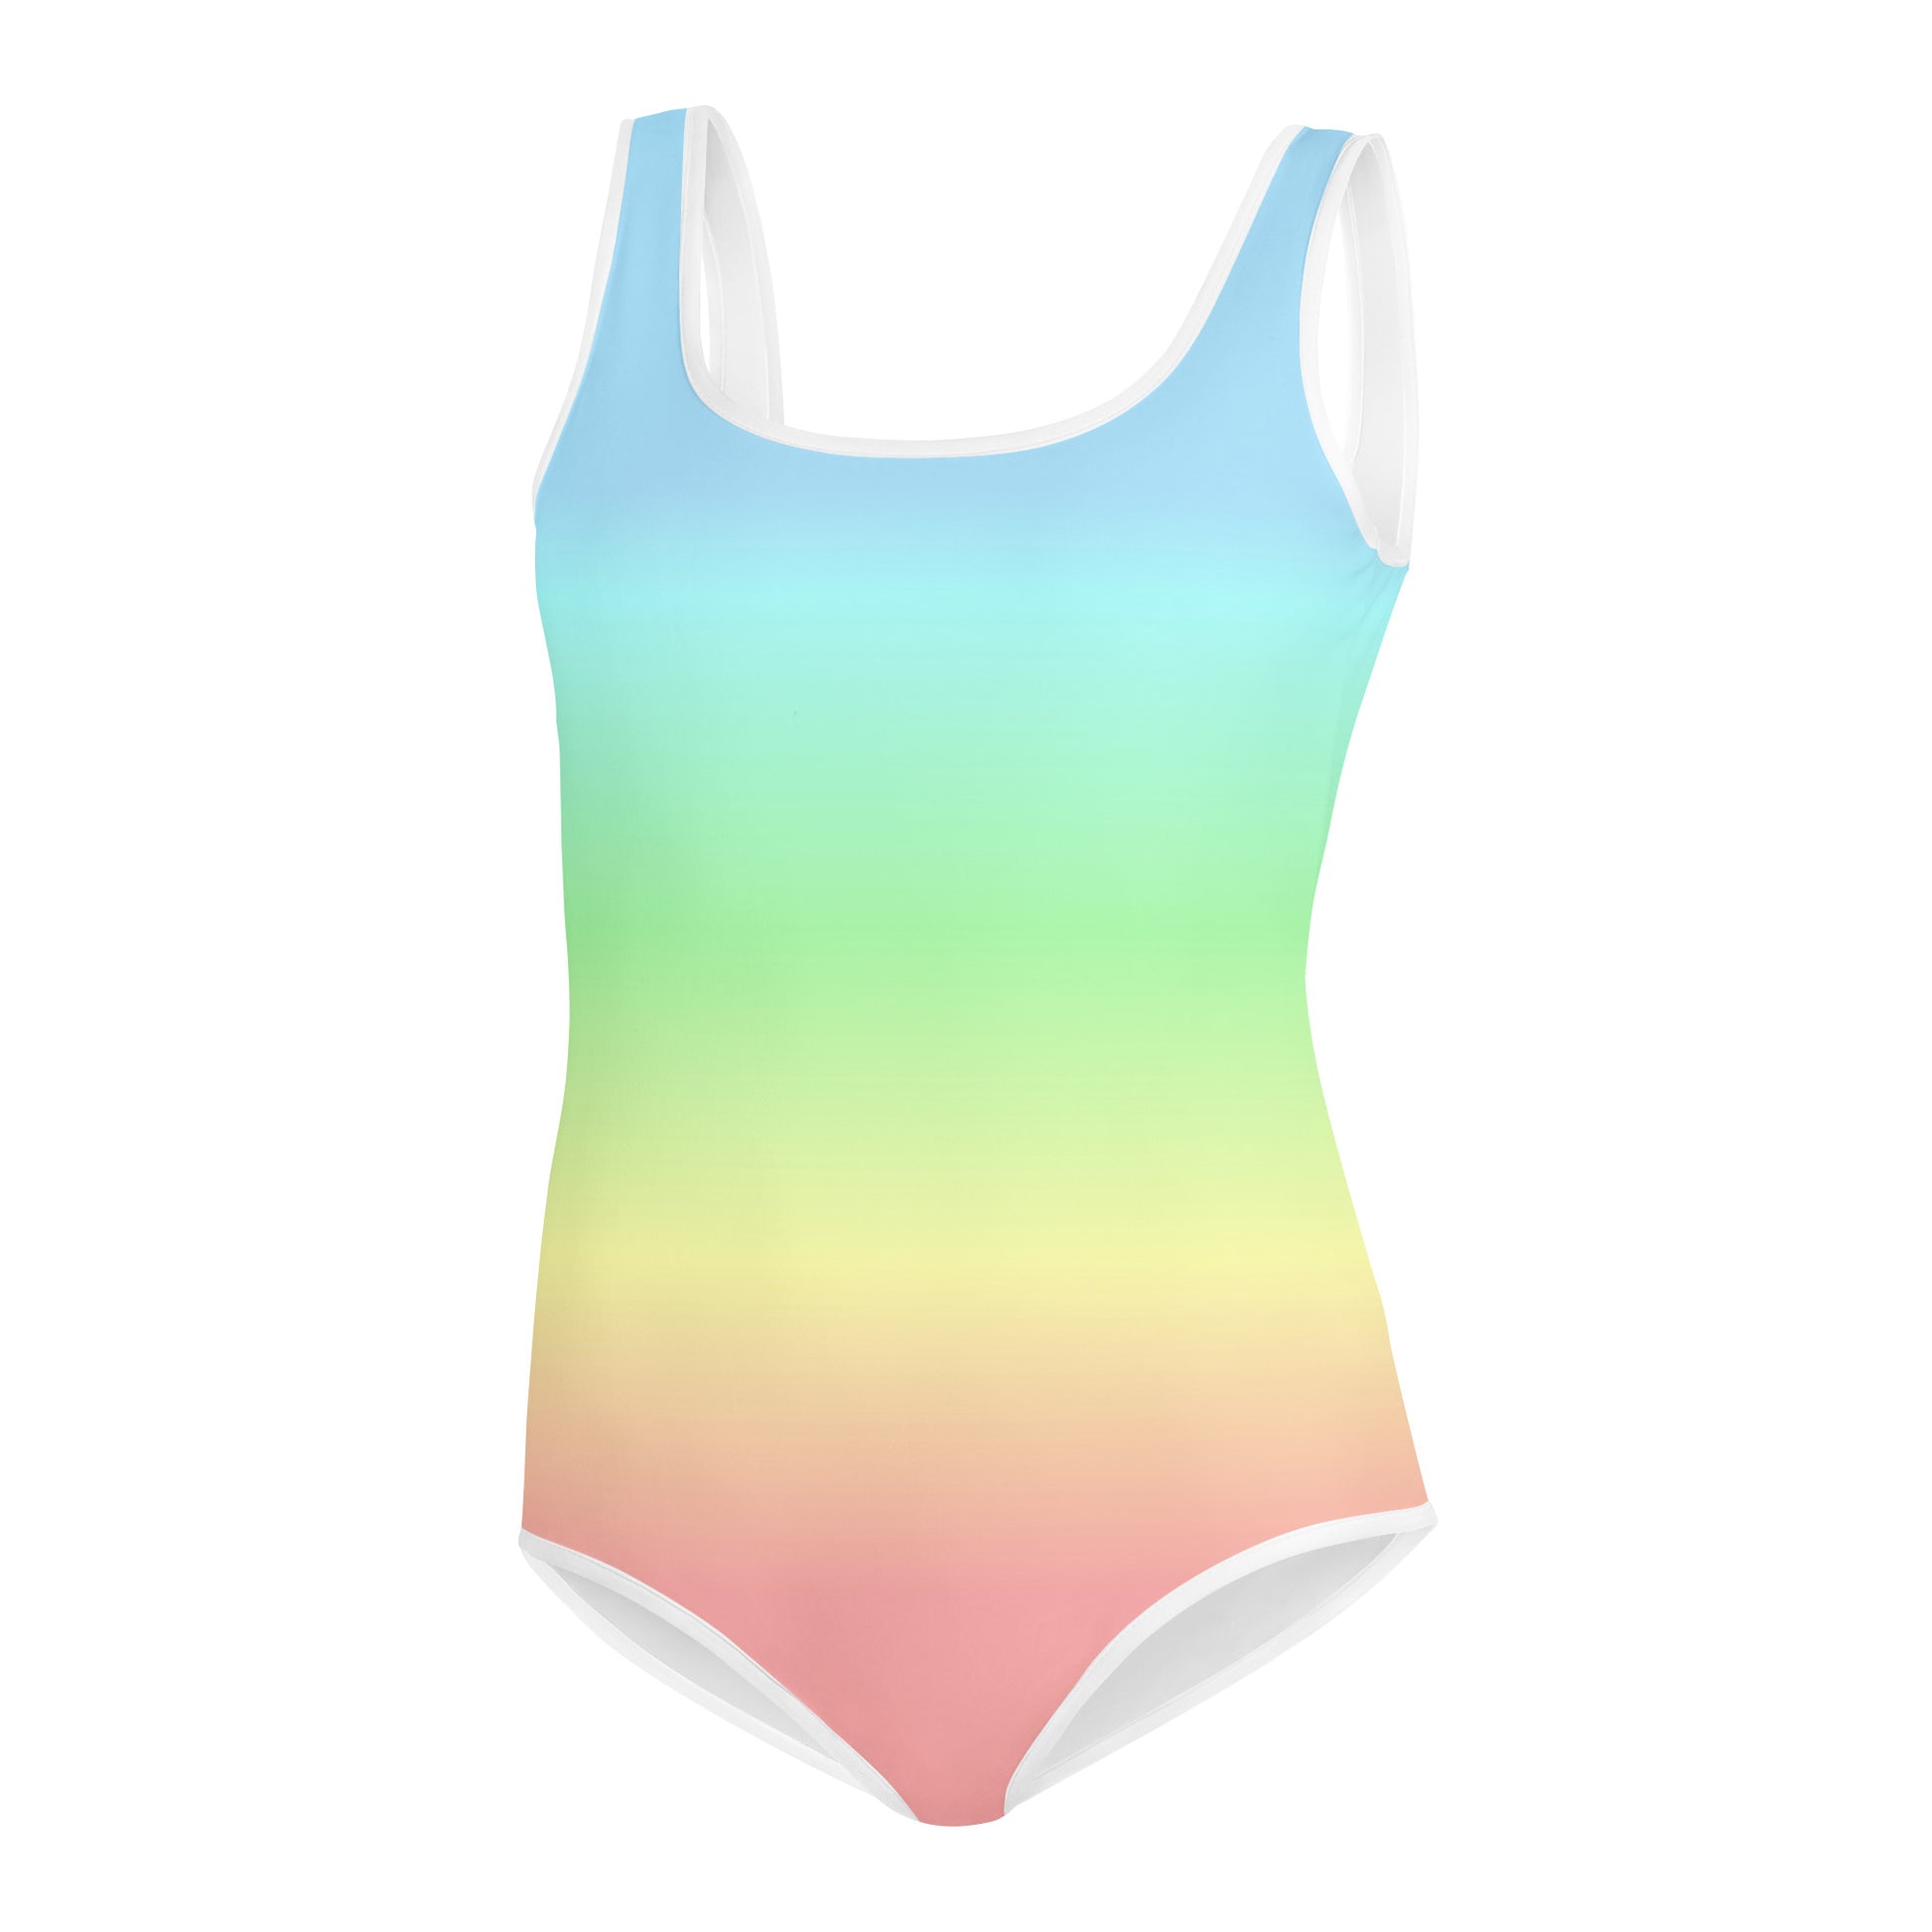 Pastel Rainbow Girls Swimsuits, Colorful Ombre Tie Dye Kids Jr Junior Tween Teen One Piece Bathing Suit Young Swimwear Starcove Fashion